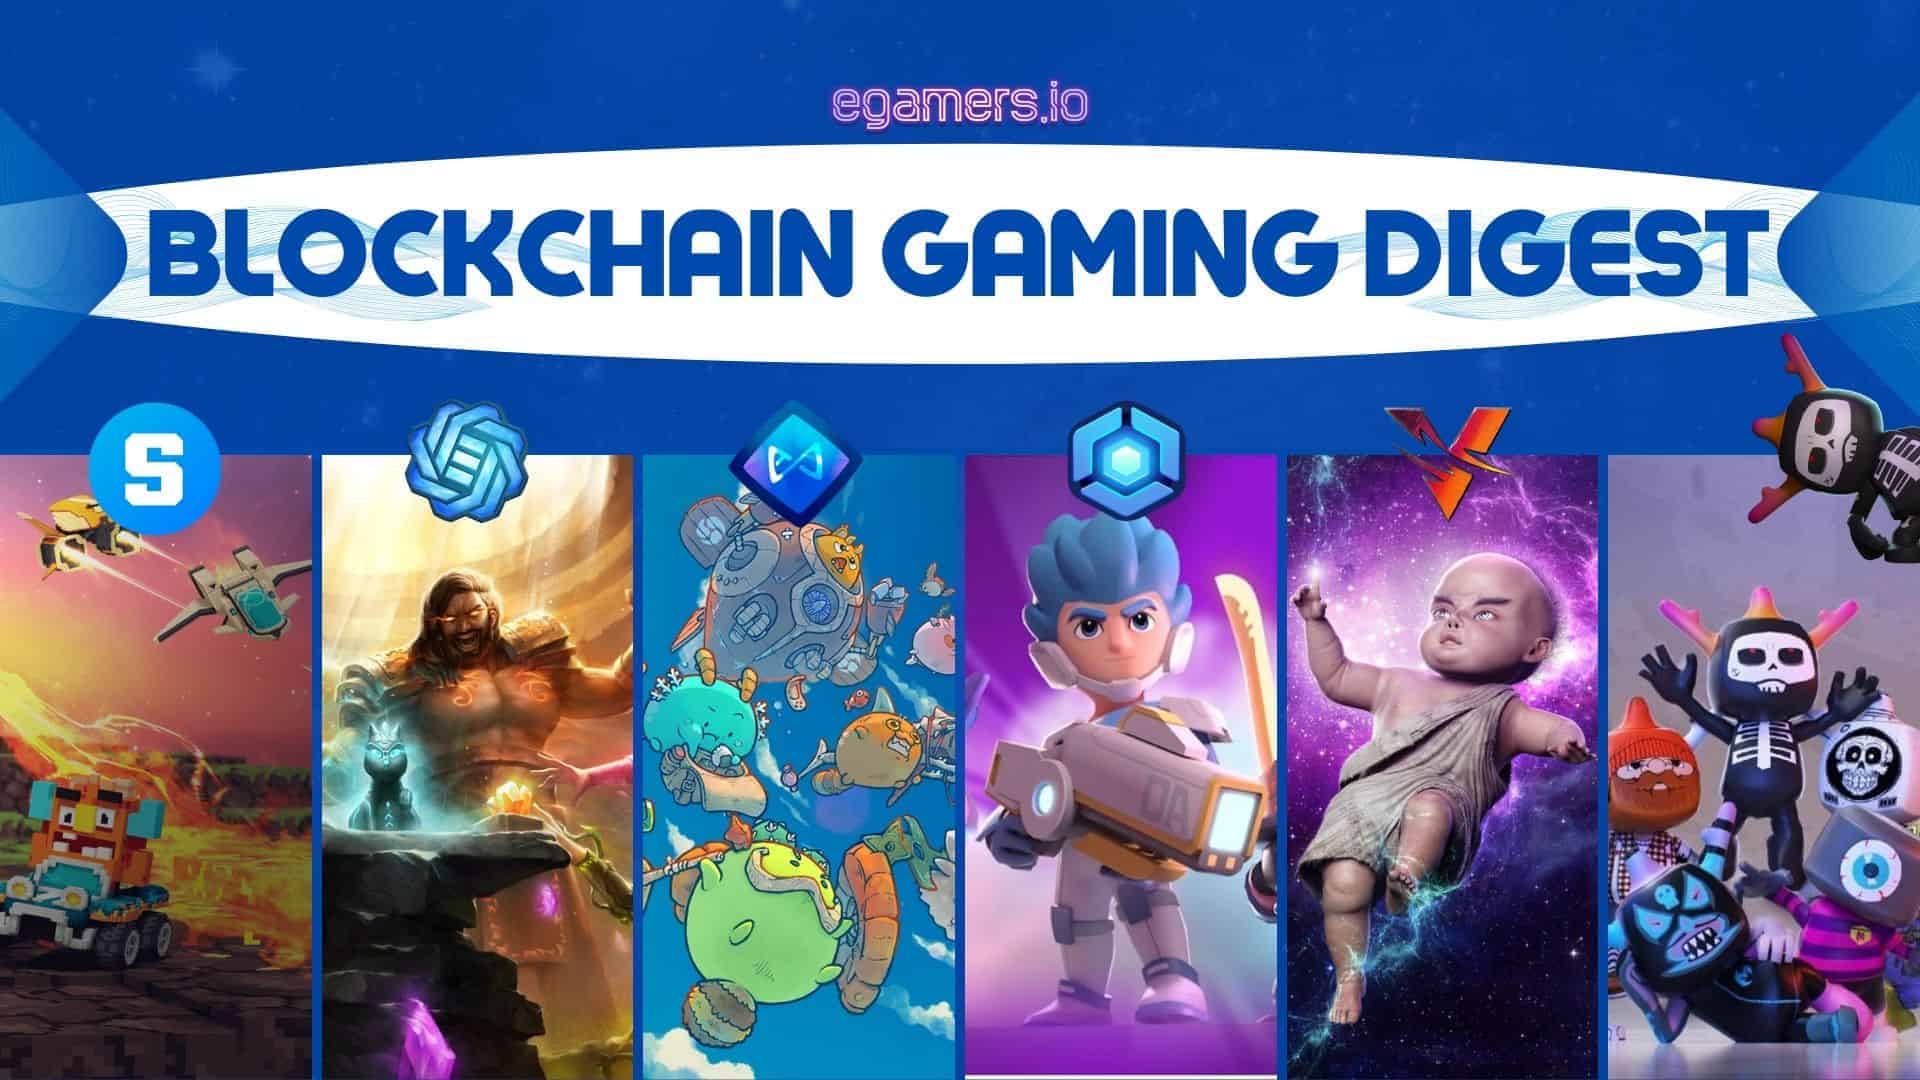 BLOCKCHAIN GAMING DIGEST new The MMO Space-themed game Dissolution is gearing up for tomorrow's limited edition ship sale after the recent departure from Enjin to the Polyient ecosystem.